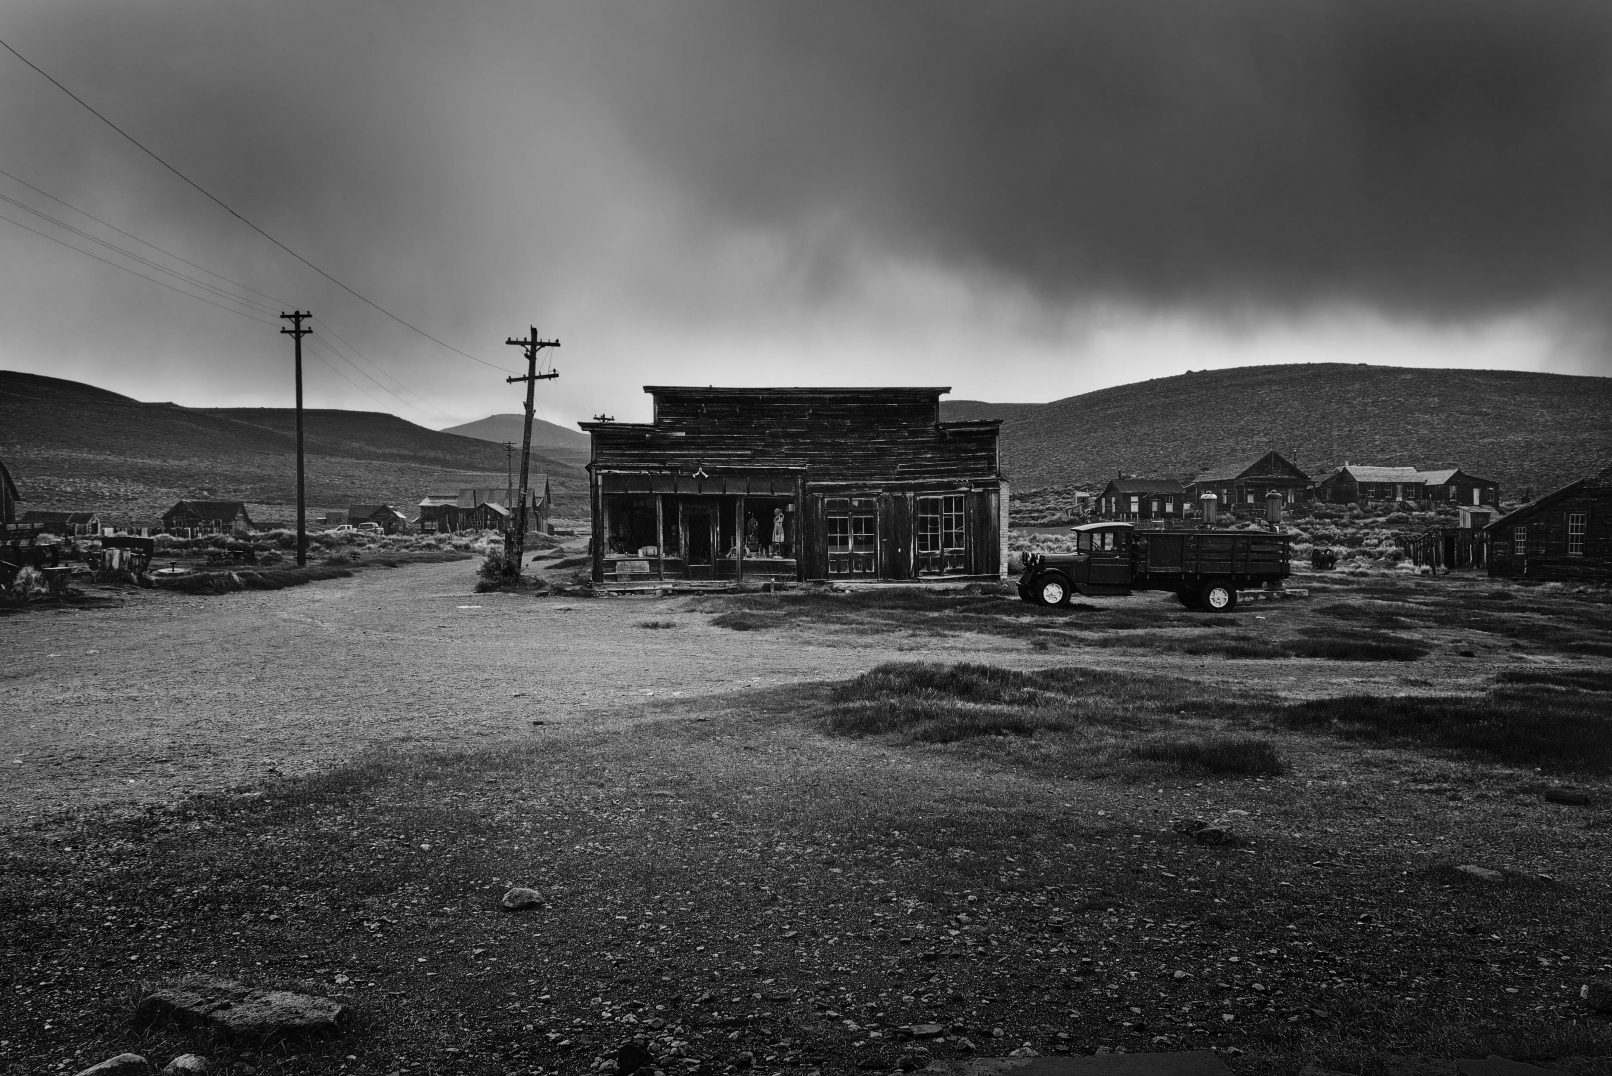 Old building exterior with stormy sky and truck in Bodi, California ghost town